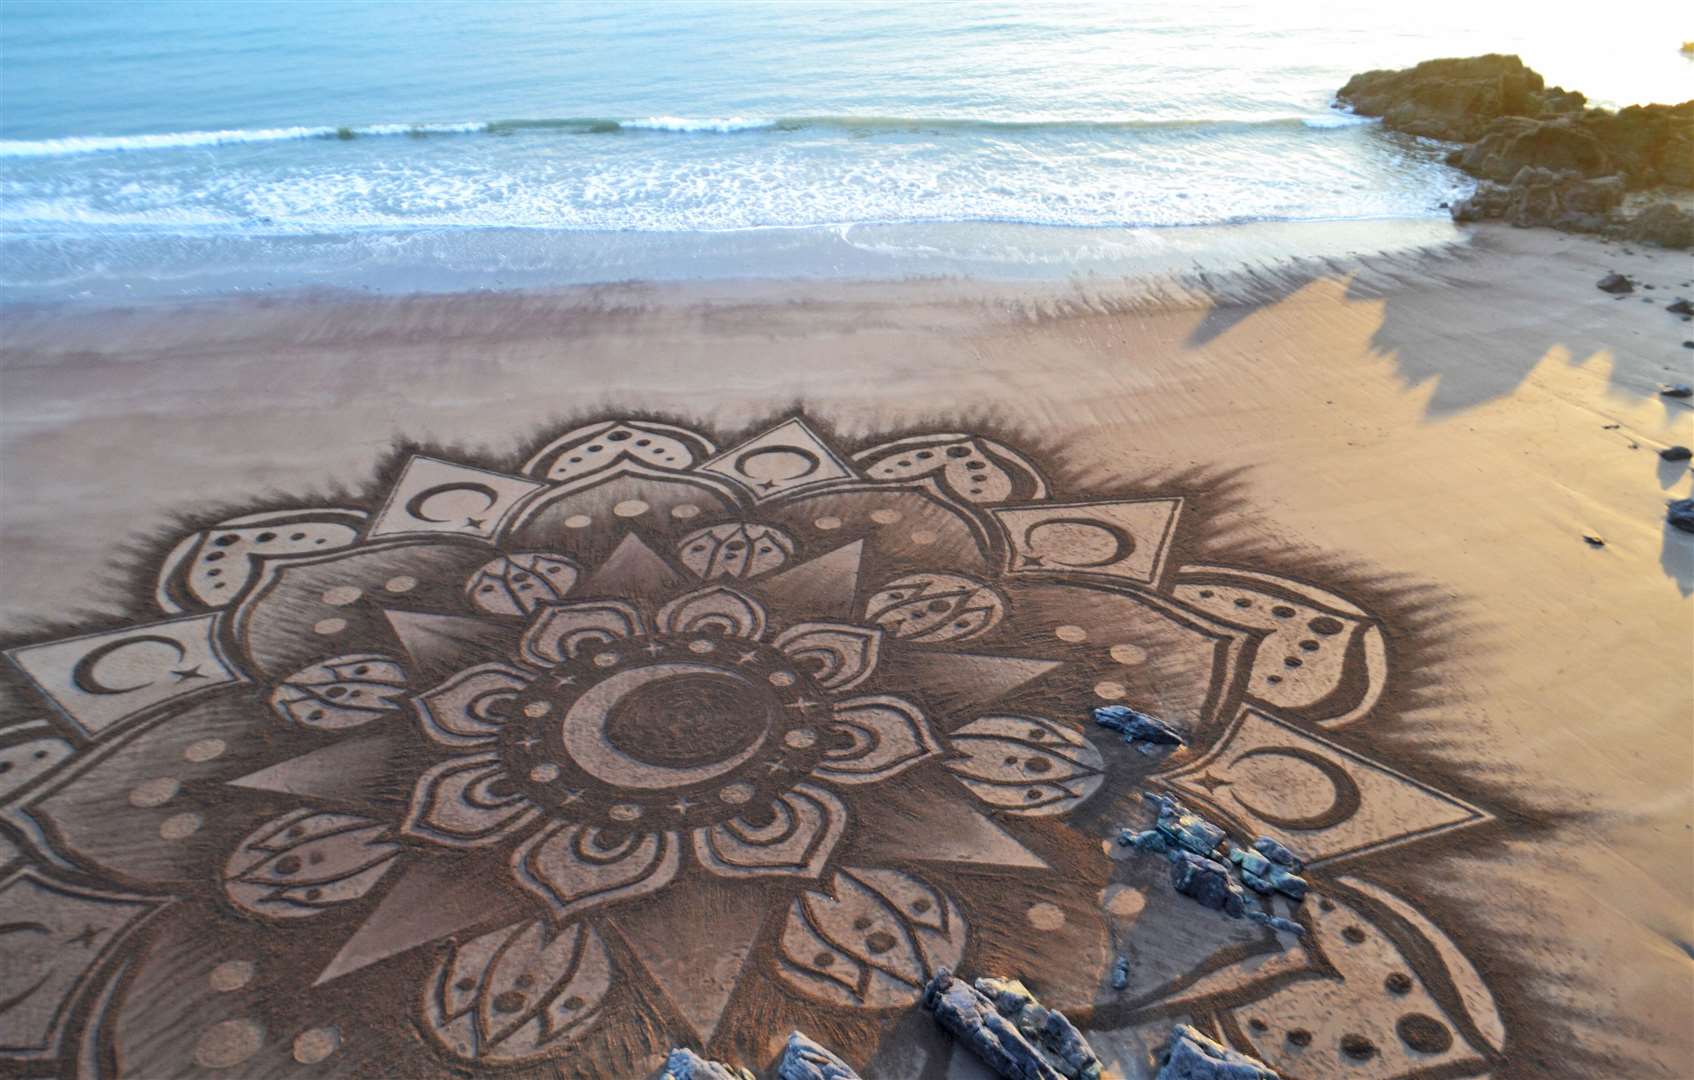 Jon Foreman’s large-scale beach art will be on the sands at Dymchurch for JAM on the Marsh